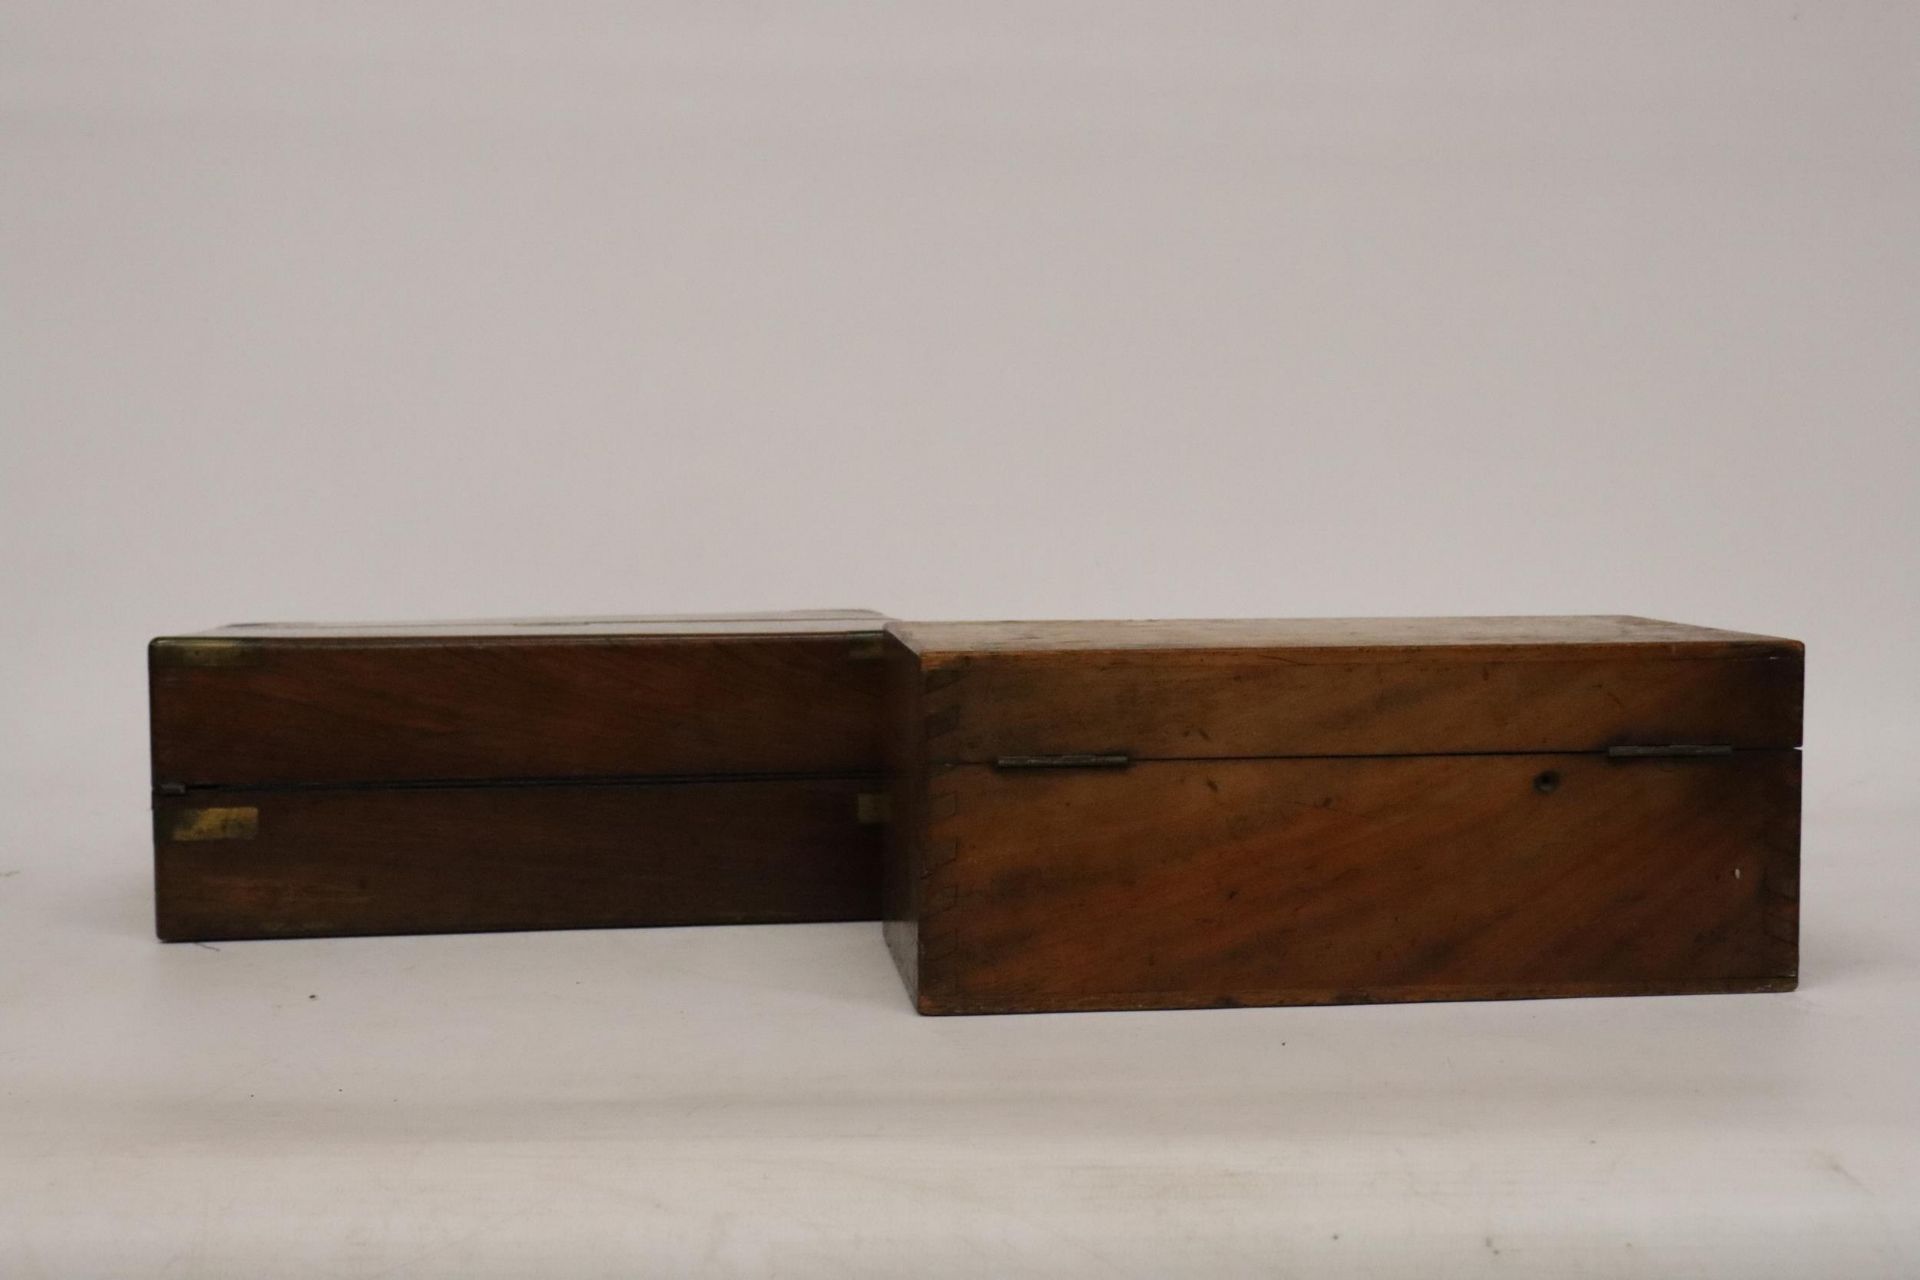 A VINTAGE MAHOGANY WRITING SLOPE, IN NEED OF RESTORATION PLUS A VINTAGE OAK BOX - Image 5 of 6